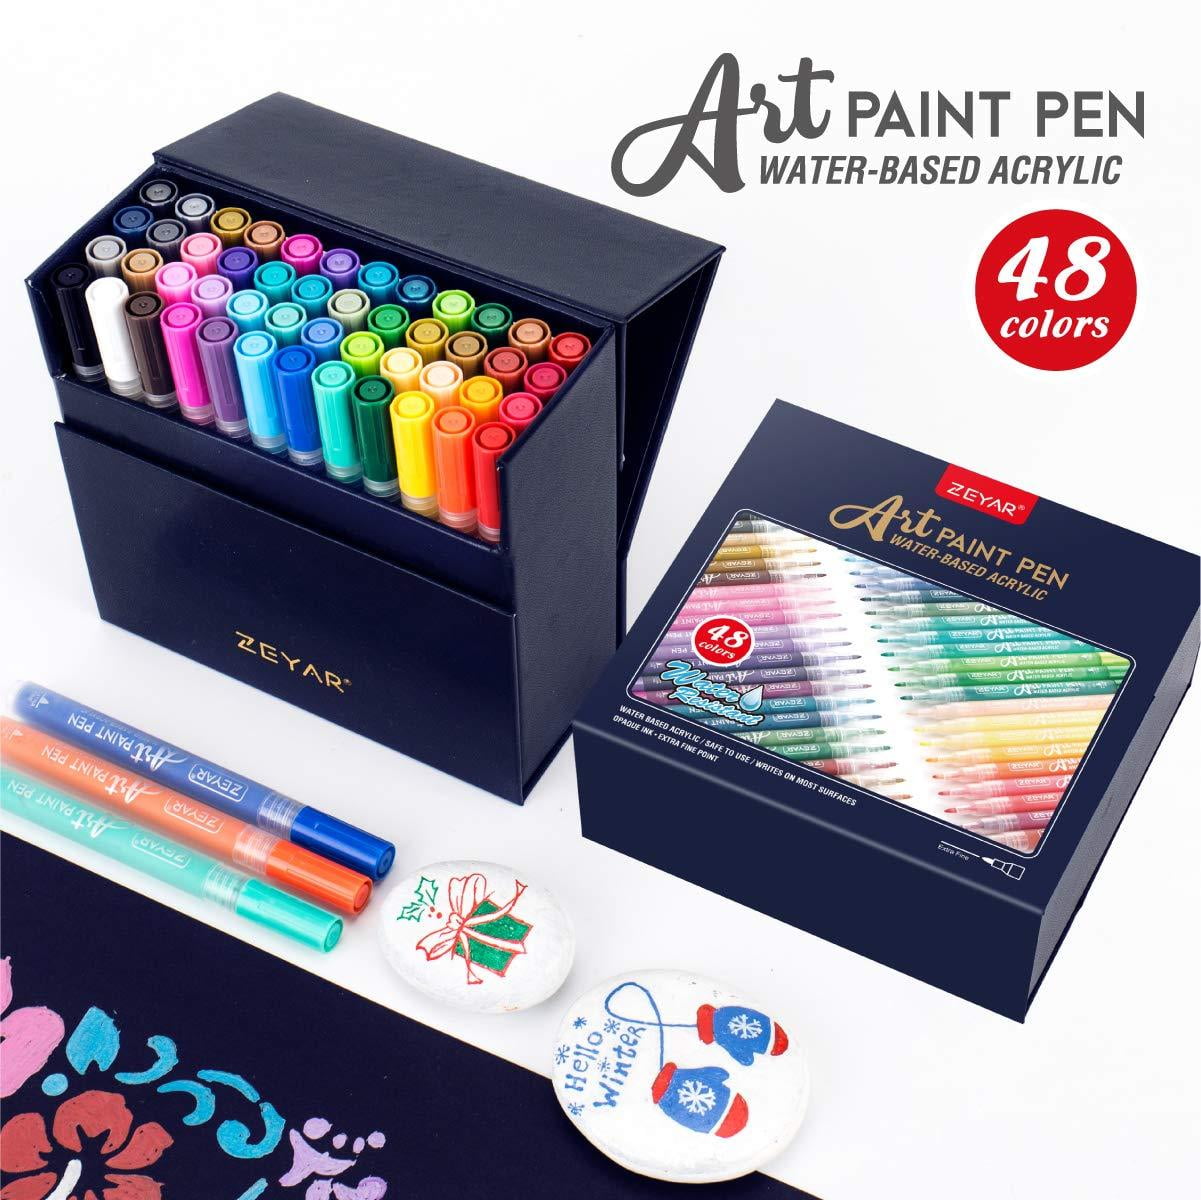 ZEYAR Premium Acrylic Paint Pen Water Based Extra Fine Point 18 Colors  Odorless Acid Free and Safe Opaque Ink Environmental Friendly AP Certified  18 Natural Colors